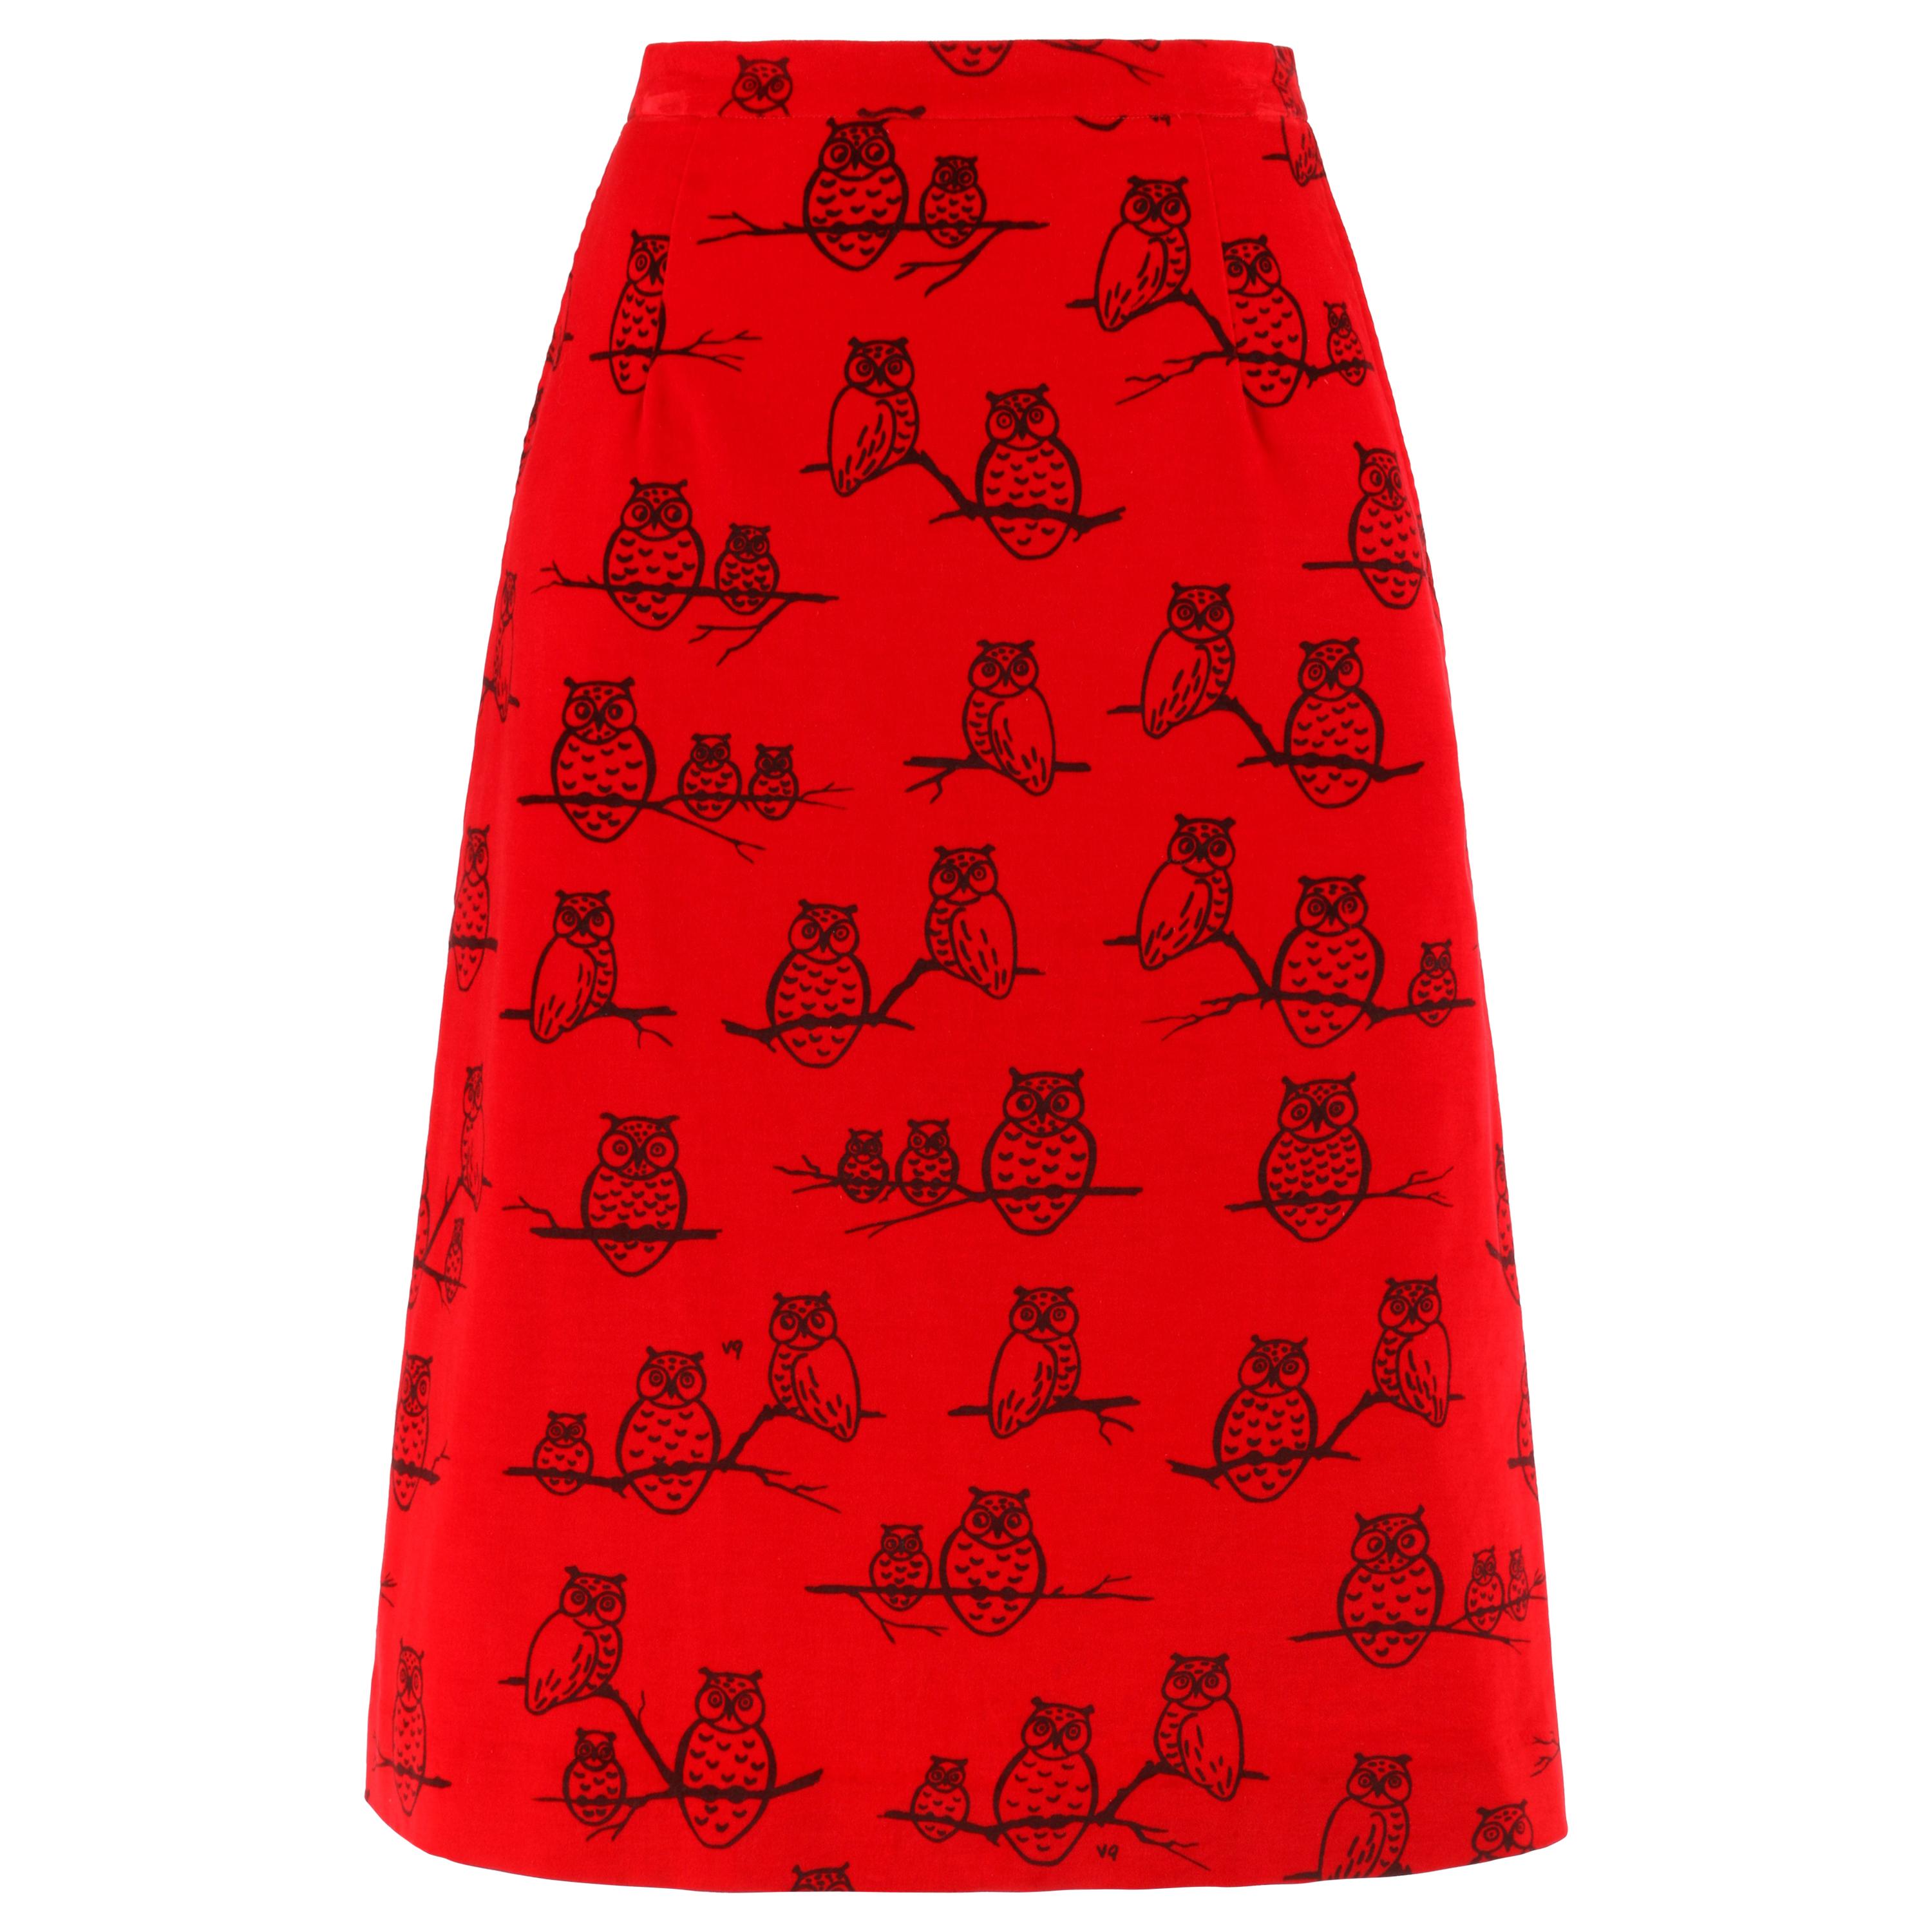 THE VESTED GENTRESS c.1970’s Red Black Owl Signature “VG” Print A-Line Skirt